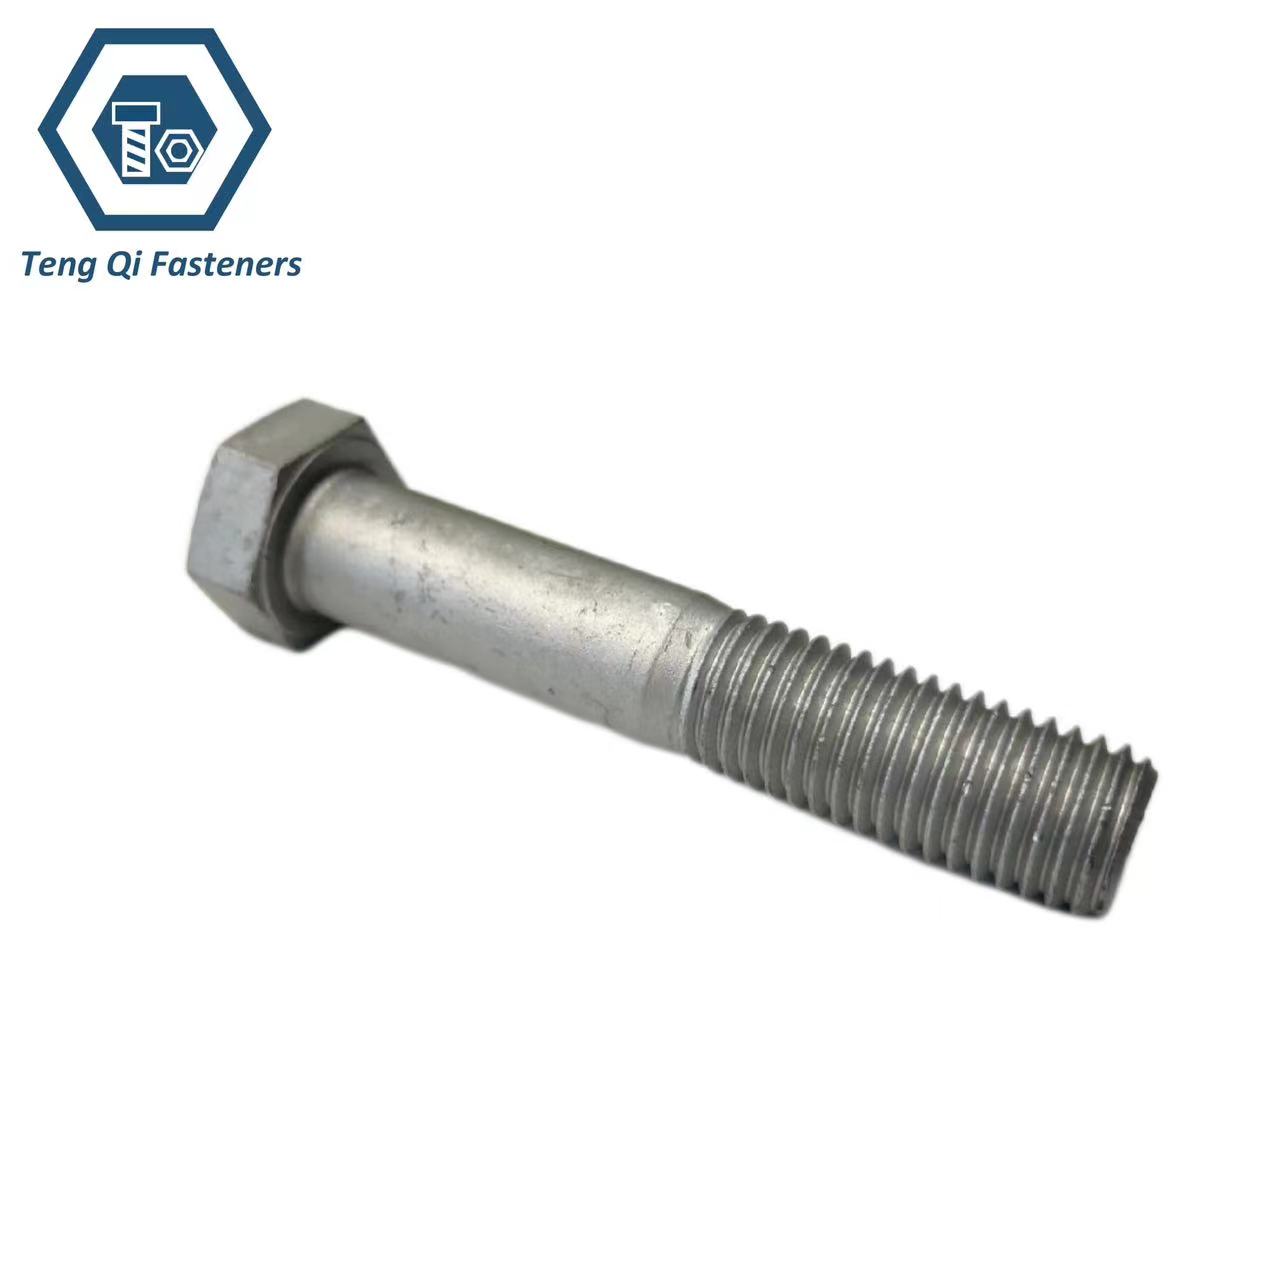 Hot dip galvanized DIN6914 High Strength Class10.9 Hex Bolts for steel structural